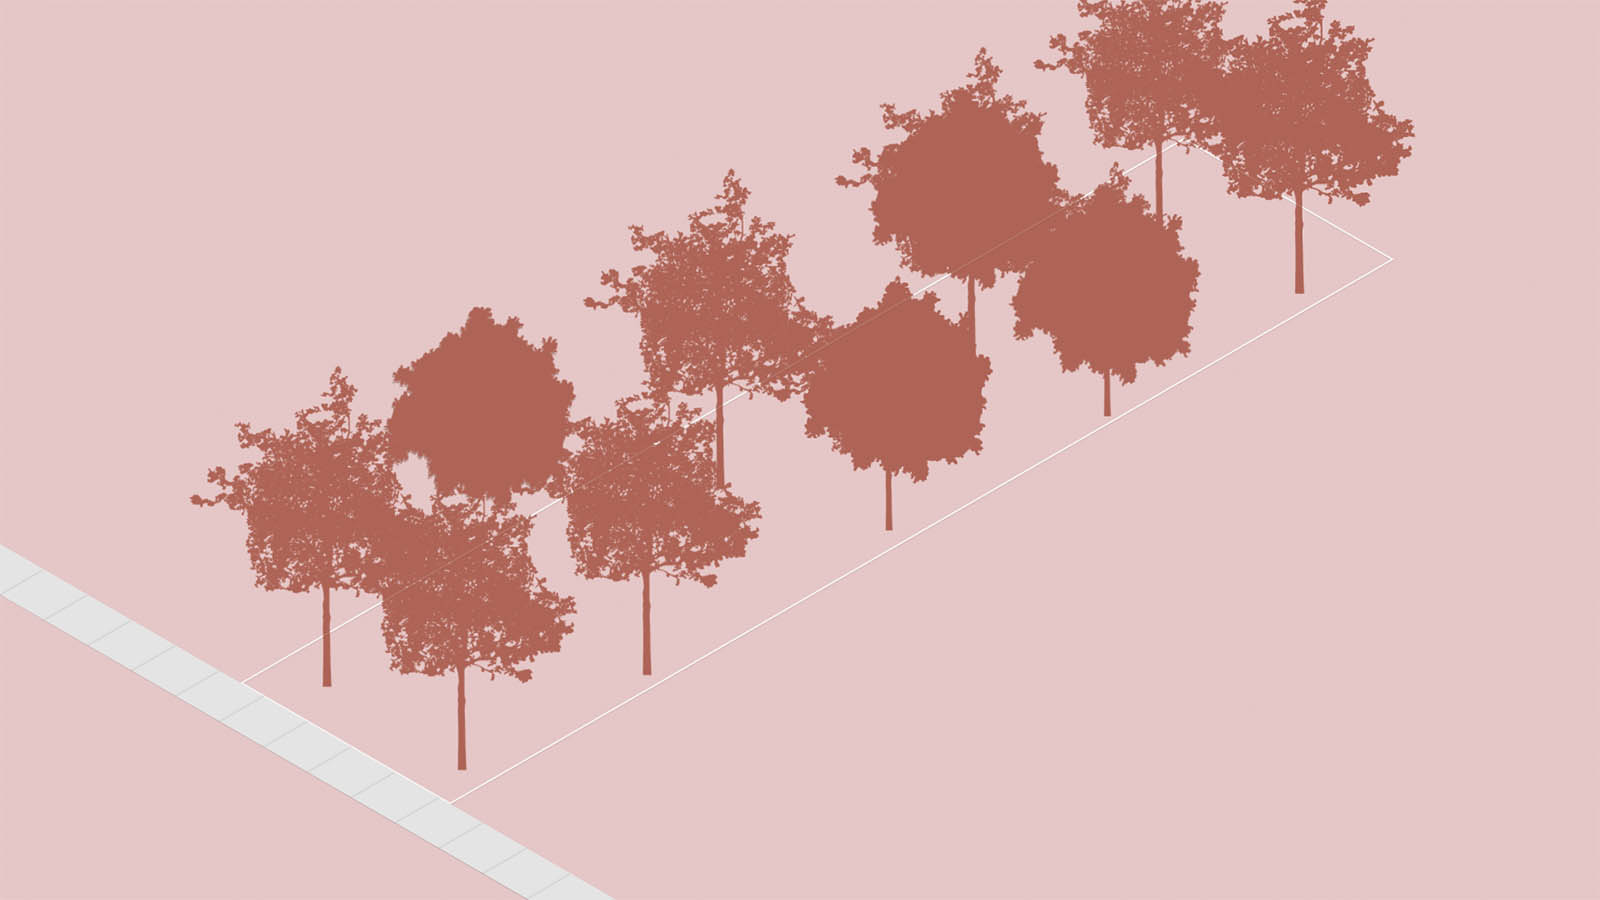 visualization of trees lined up in two rows